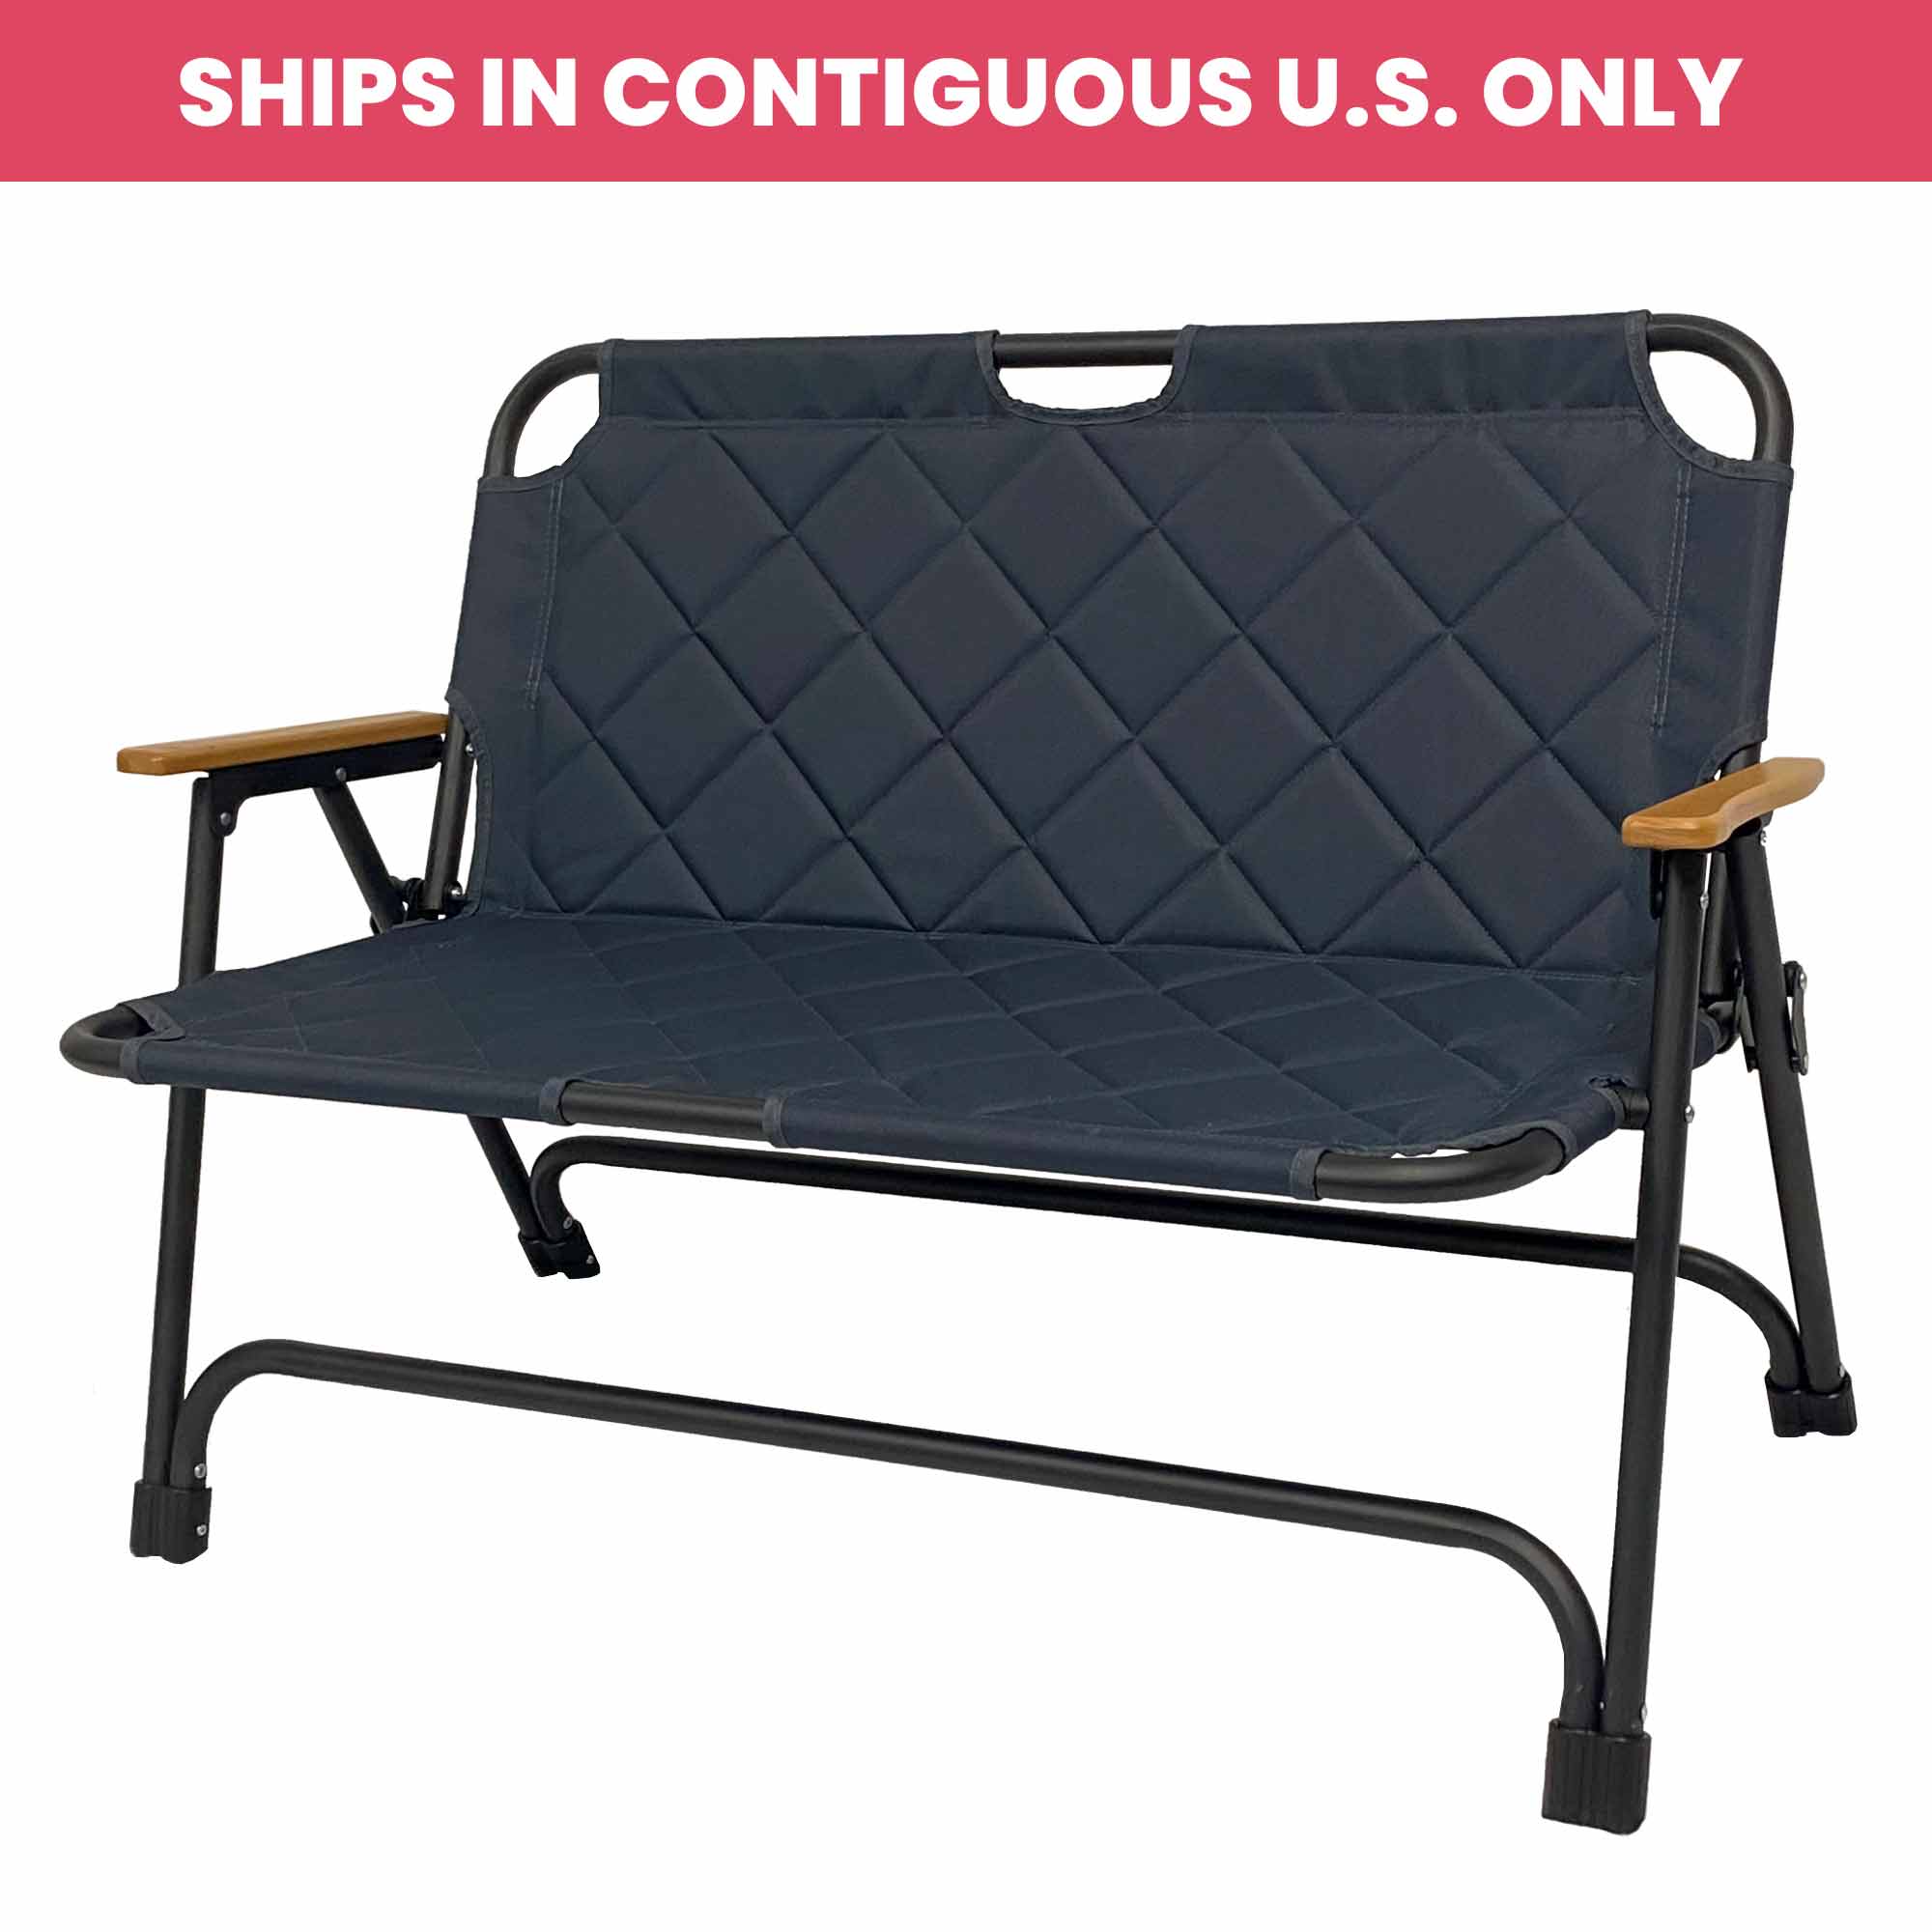 Deluxe Portable 2-Person Folding Bench Seat